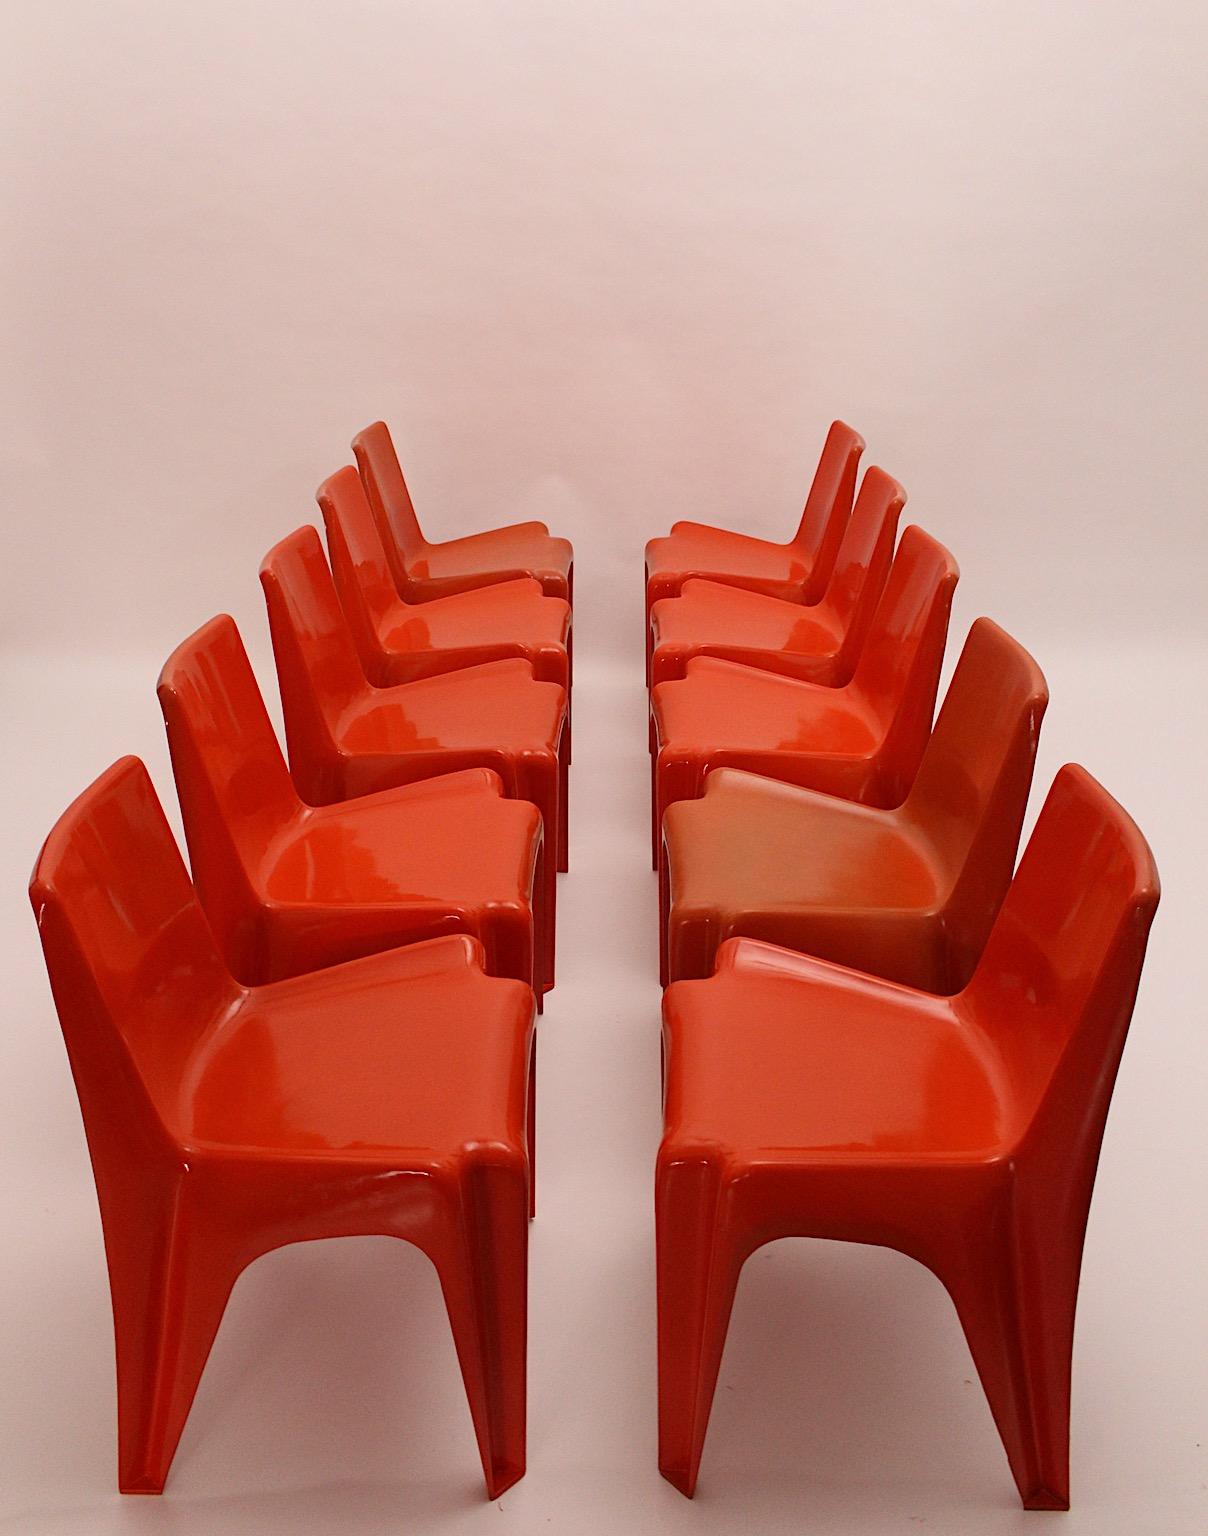 Space Age vintage ten dining chairs or chairs from plastic in cherry red color tone by Helmut Baetzner Bofinger 1964 Germany.
The chairs are stamped underneath and are presented in a rare set of ten chairs.
All chairs are stable and sturdy.
These